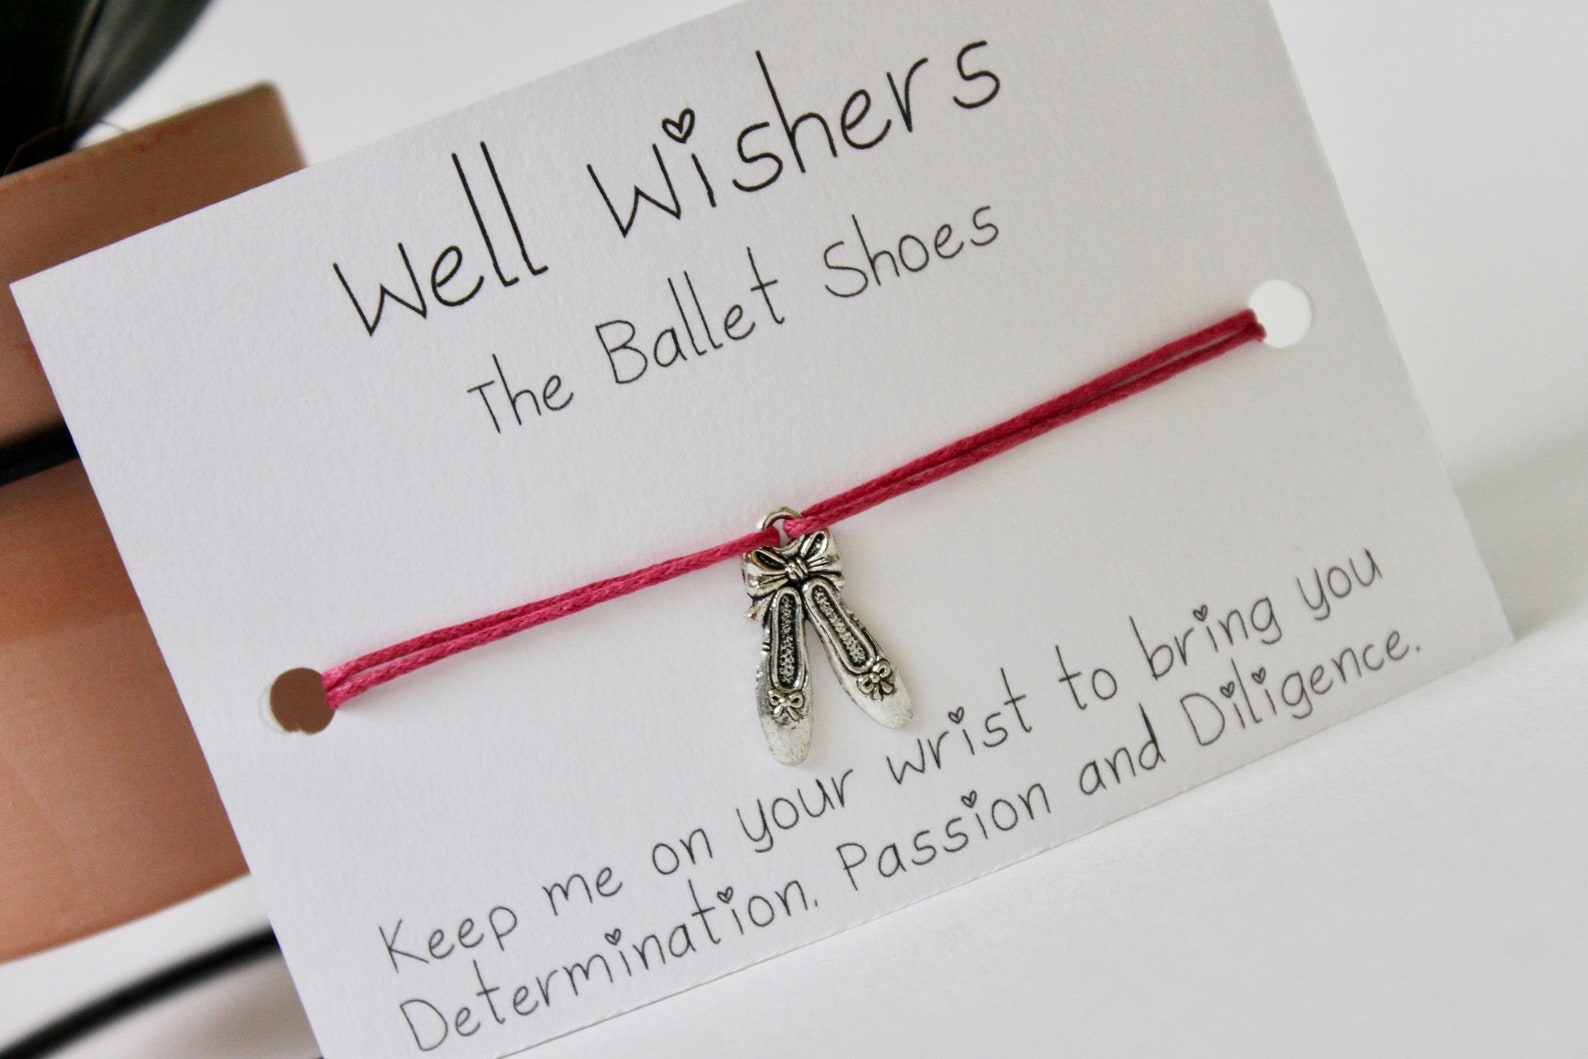 ballet shoes charm bracelet - determination, passion and diligence| well wisher, wish bracelet, bff gift, dance, ballerina, birt